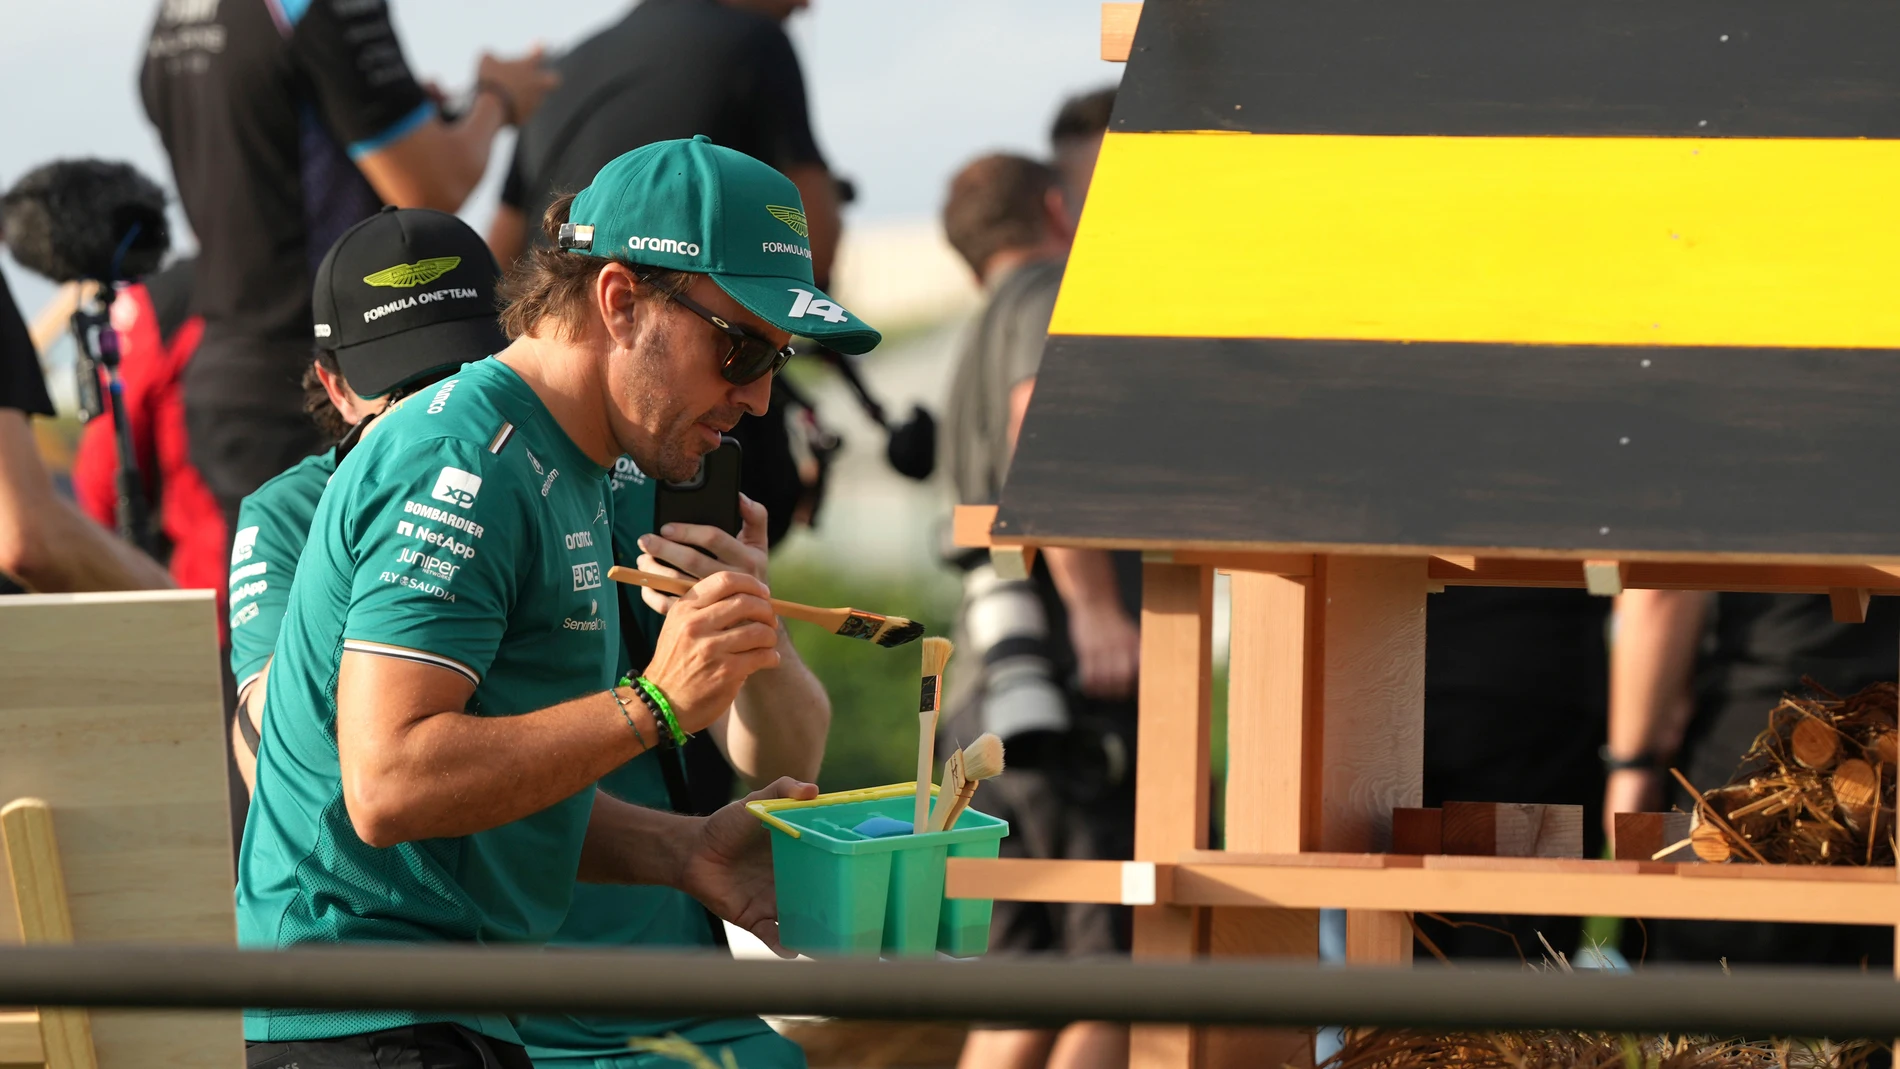 Aston Martin driver Fernando Alonso of Spain paints an insect house where bees and others insect will be able to seek refuge, during former Formula 1 world champion Sebastian Vettel's Buzzin' Corner project that aims to raise awareness for biodiversity, ahead of the Japanese Formula One Grand Prix at the turn two of the Suzuka Circuit in Suzuka, central Japan, Thursday, Sept. 21, 2023. (AP Photo/Toru Hanai)